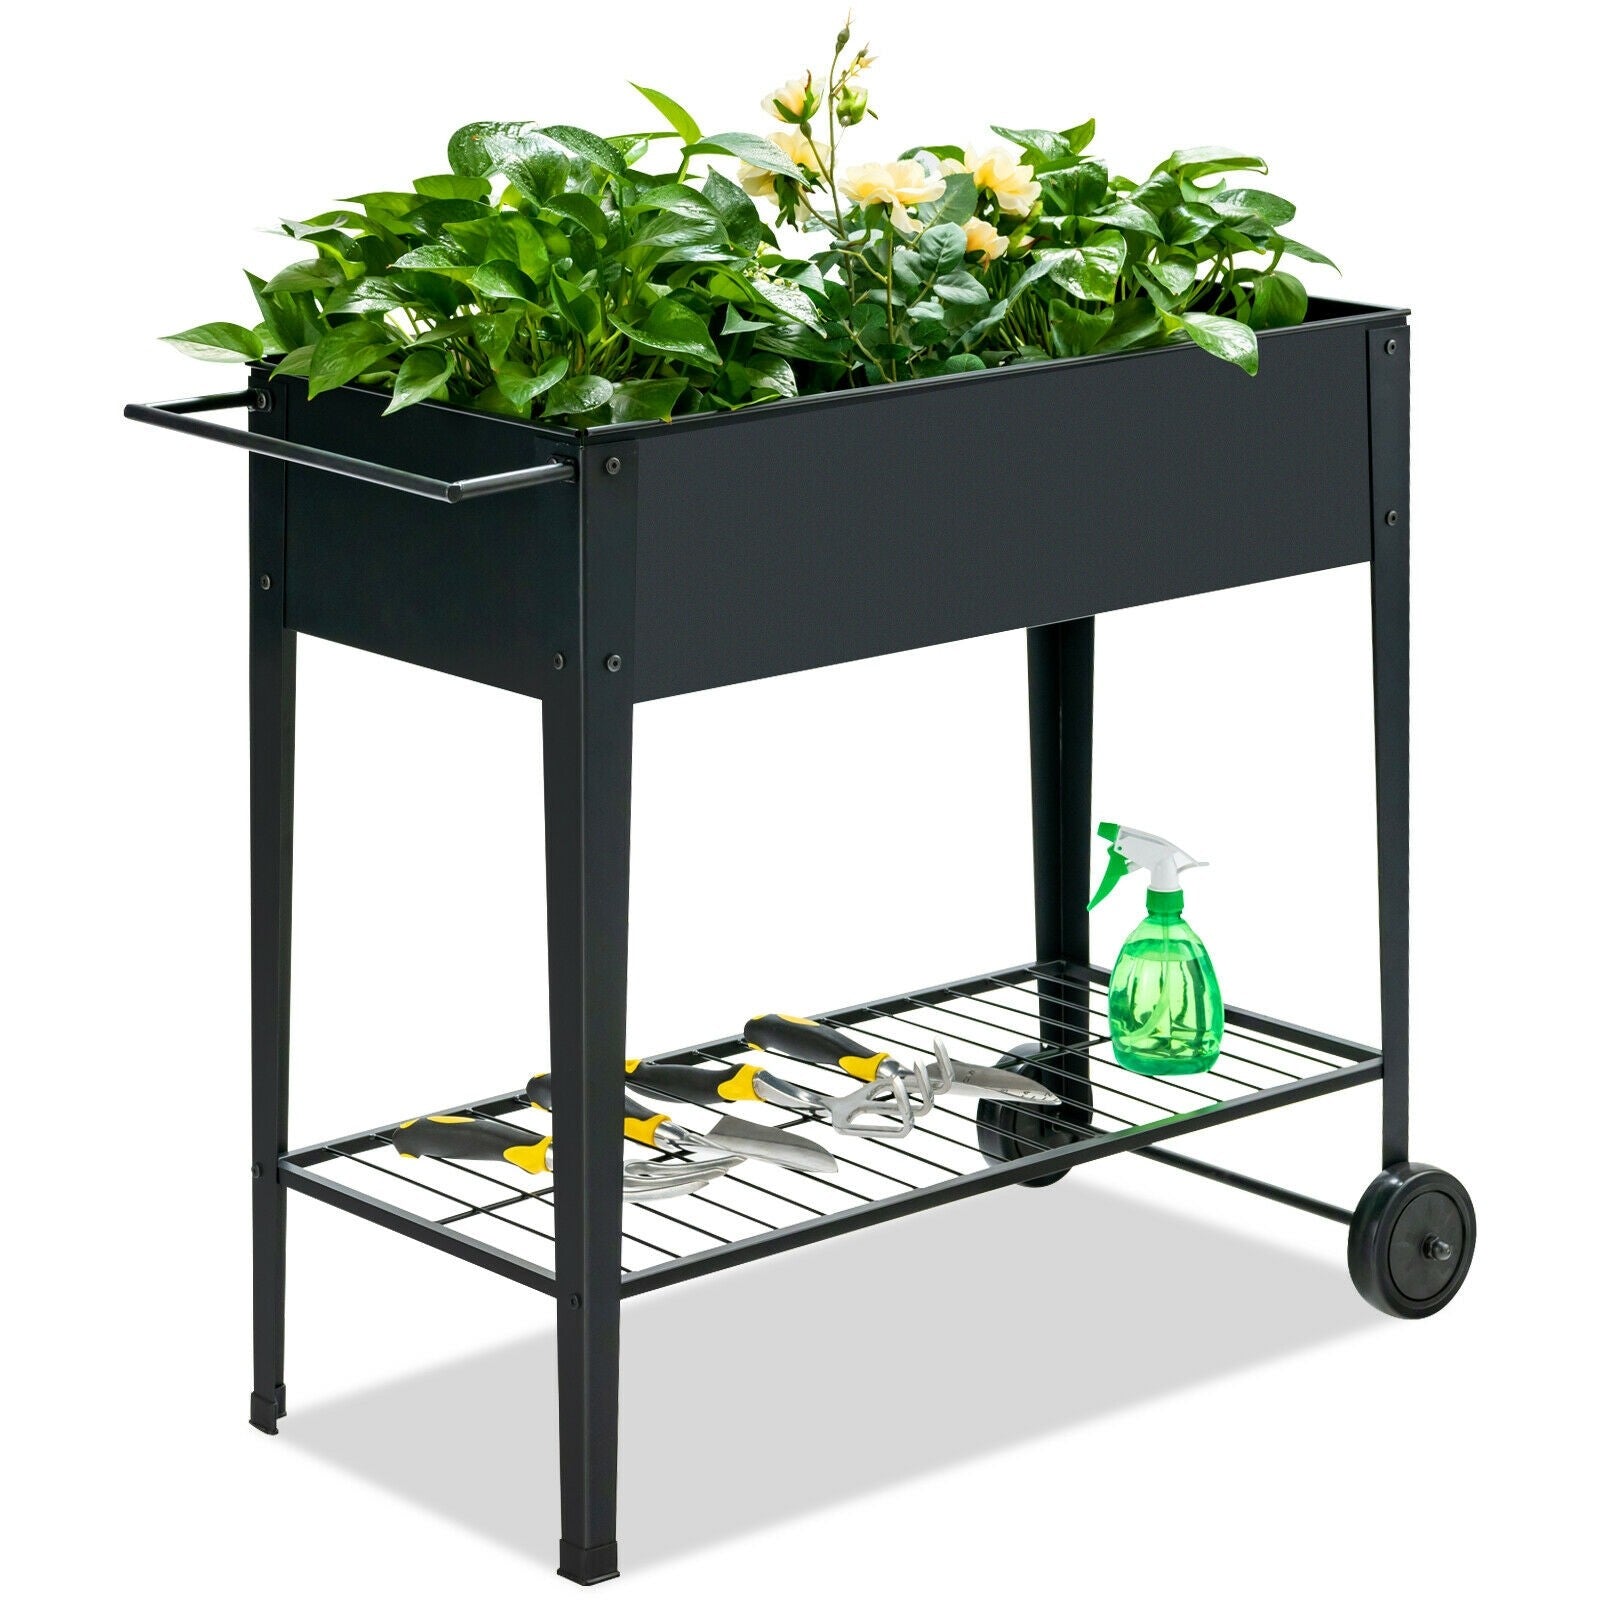 Outdoor Raised Garden Bed on Wheels with Legs